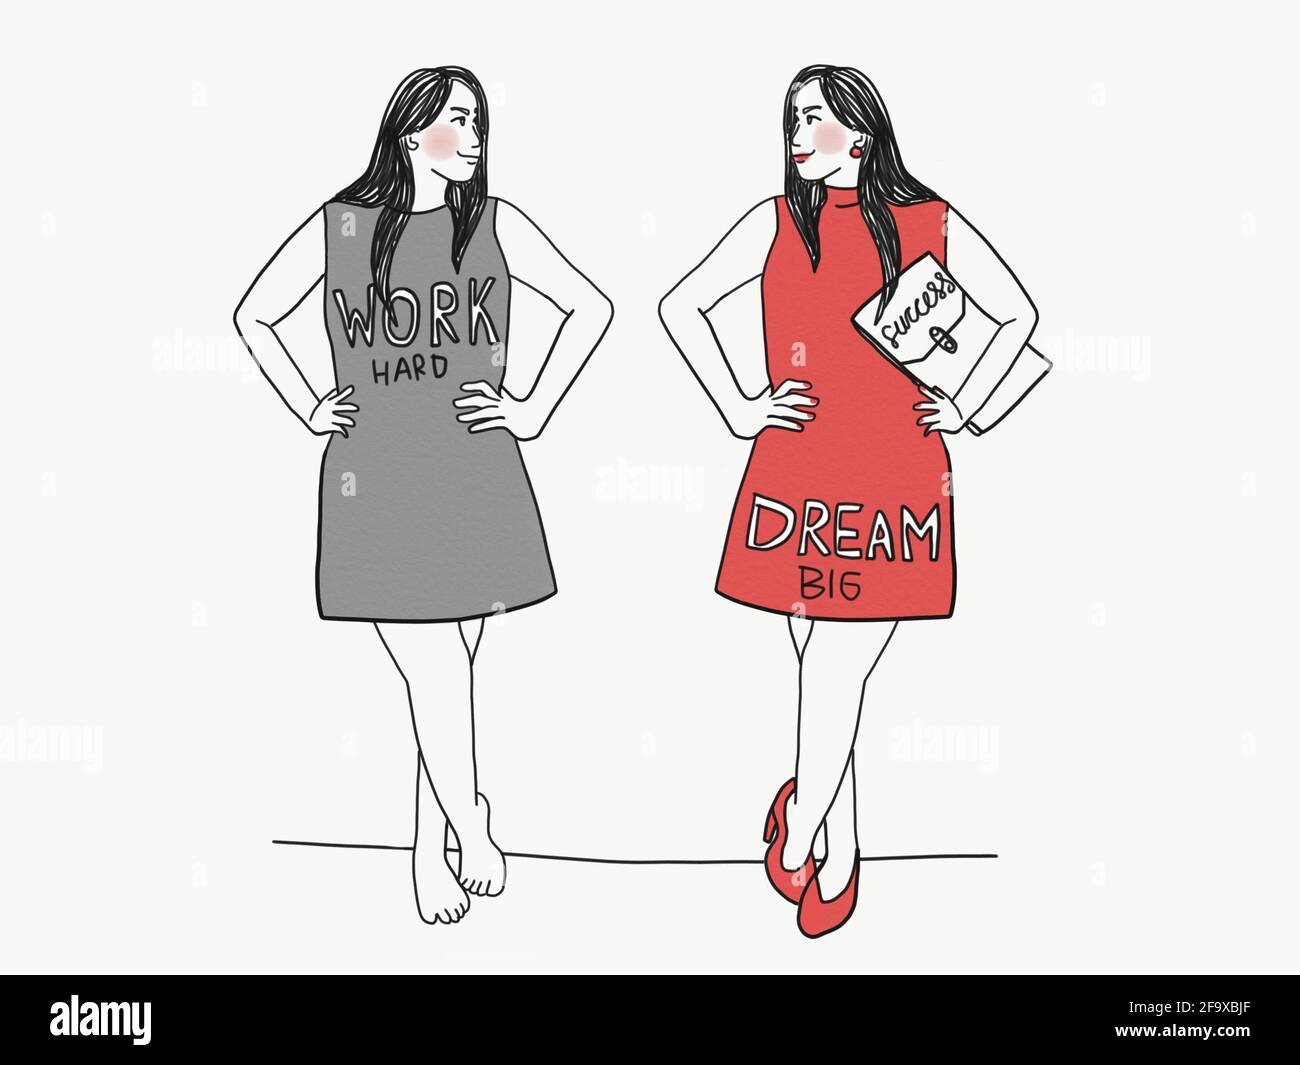 Work hard and dream big woman in causal dress and business dress transformation line art drawing illustration Stock Photo